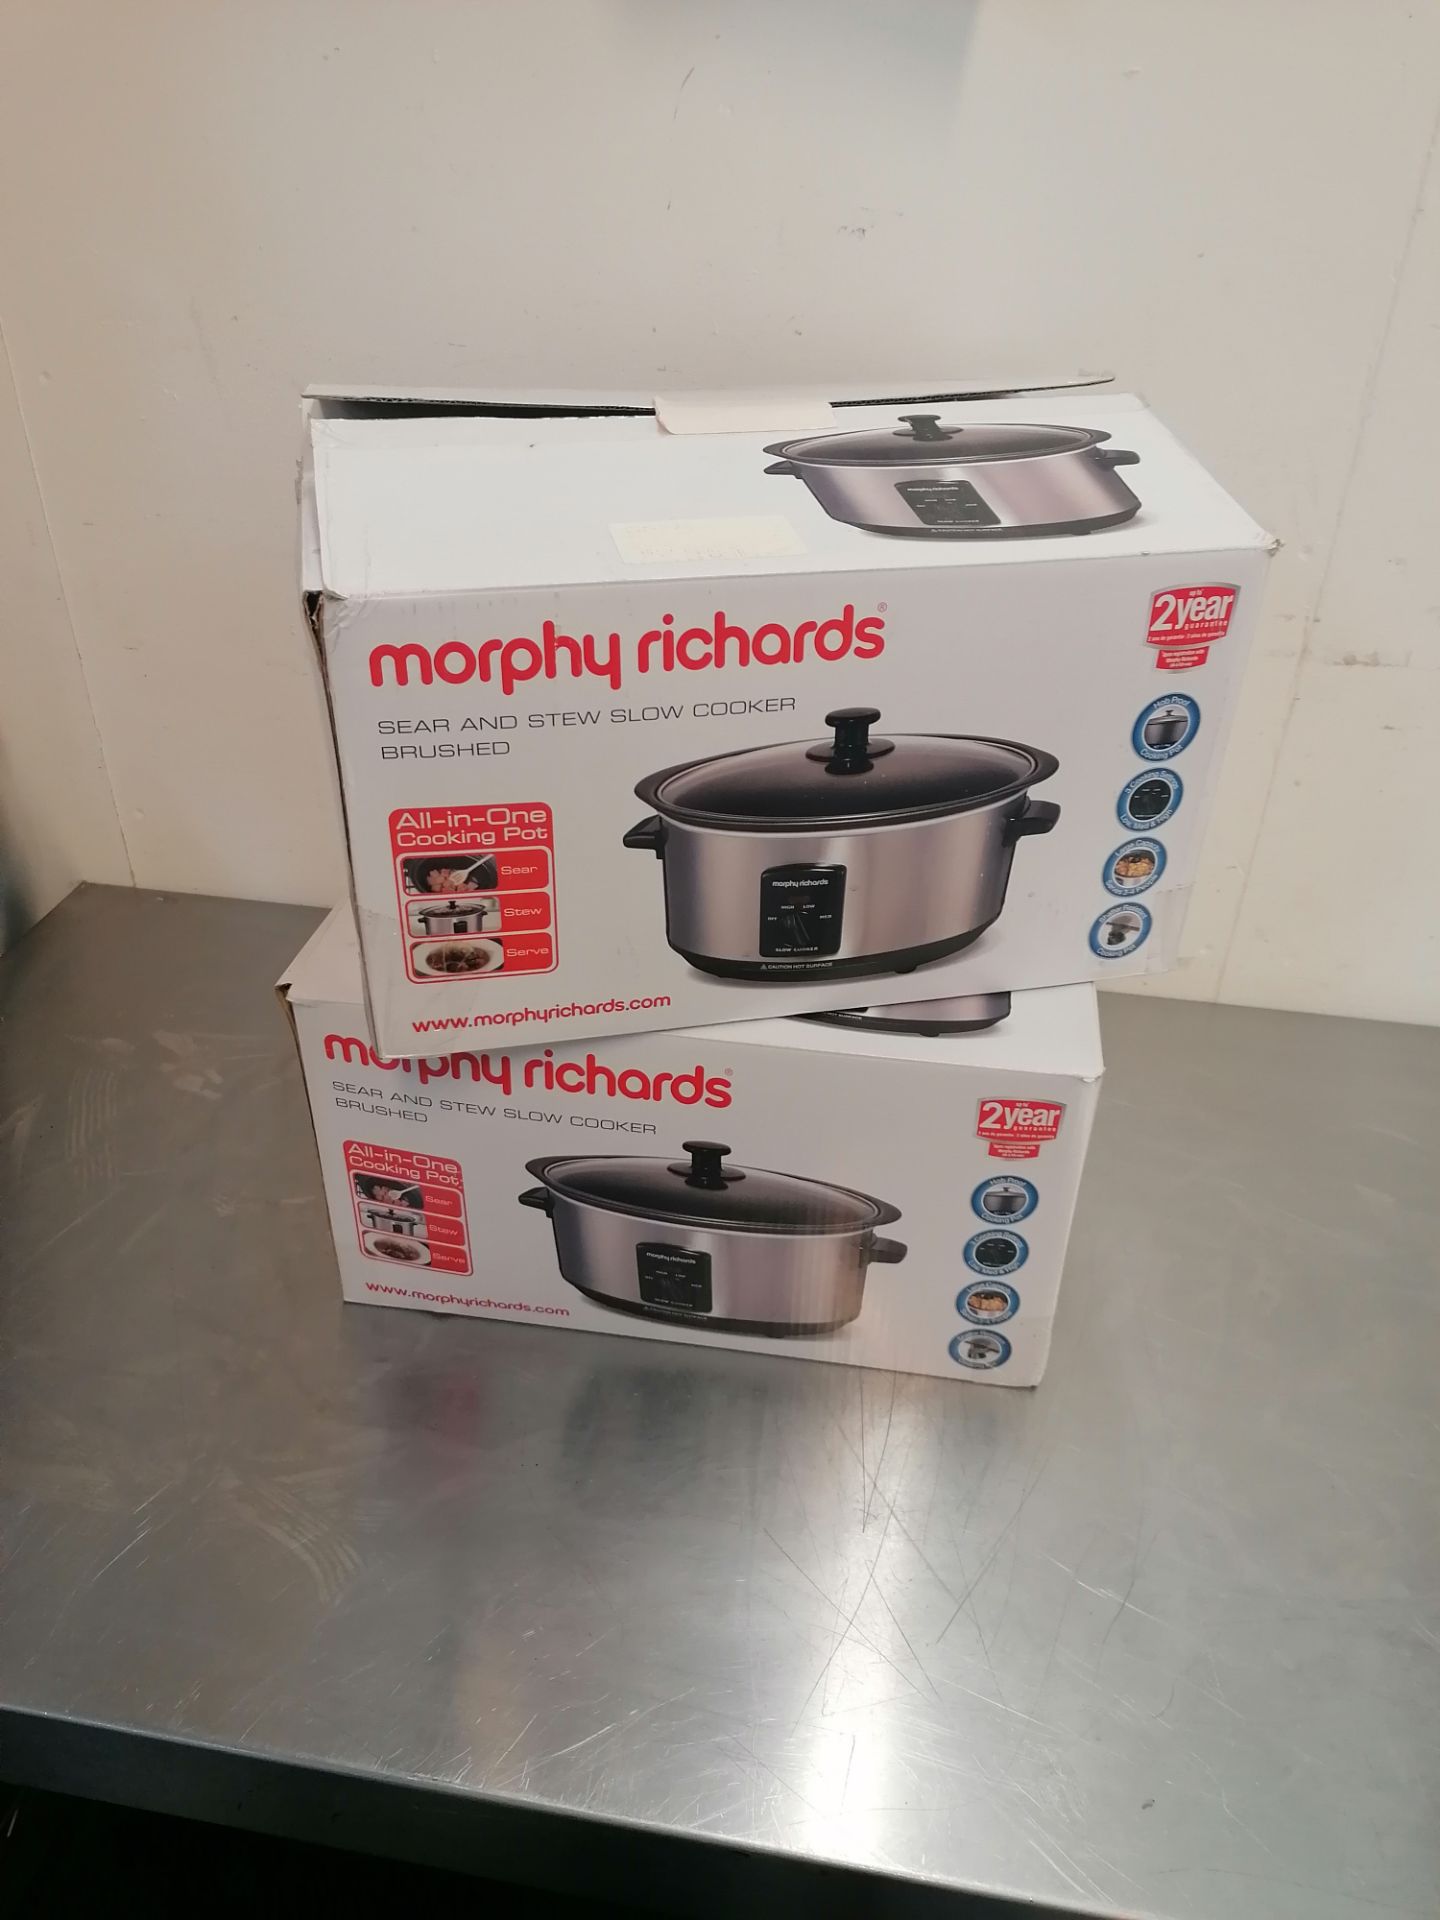 2 x Morphy richards 48701 slow cooker - Image 4 of 4